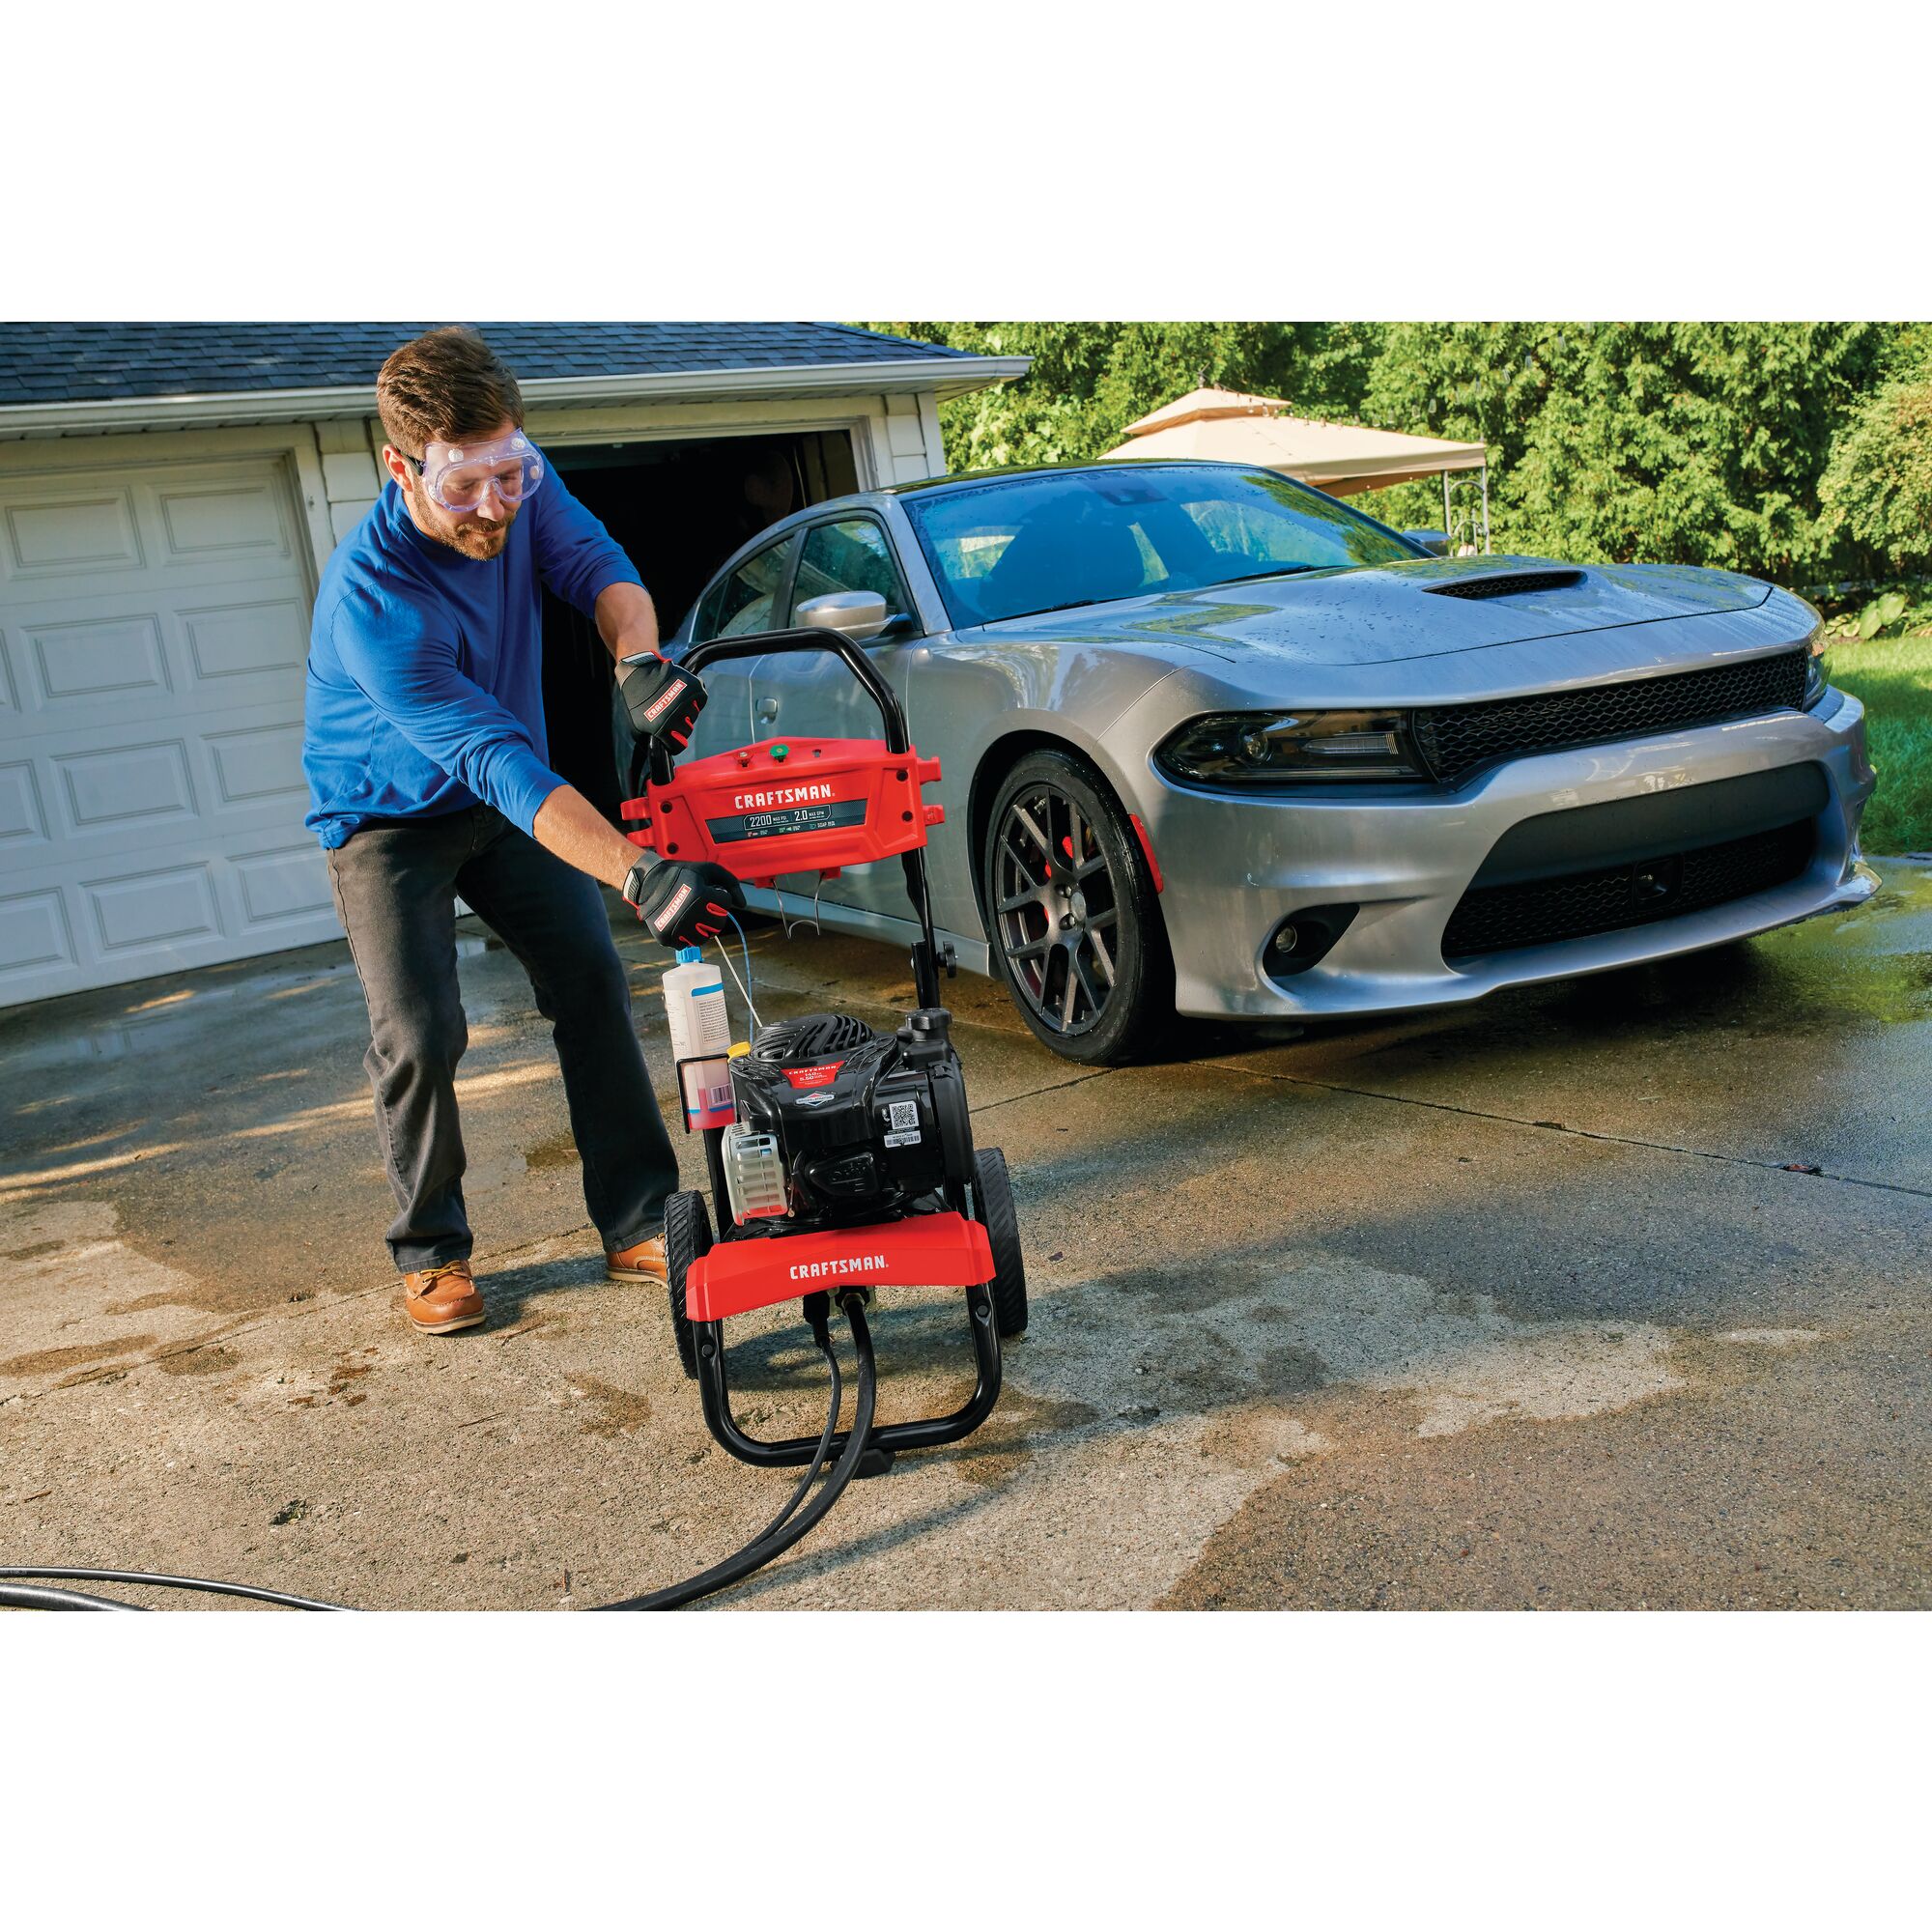 Person gearing up to use 2200 MAX Pounds per Square Inch or 2 MAX Gallons Per Minute Pressure Washer to wash car outdoors.